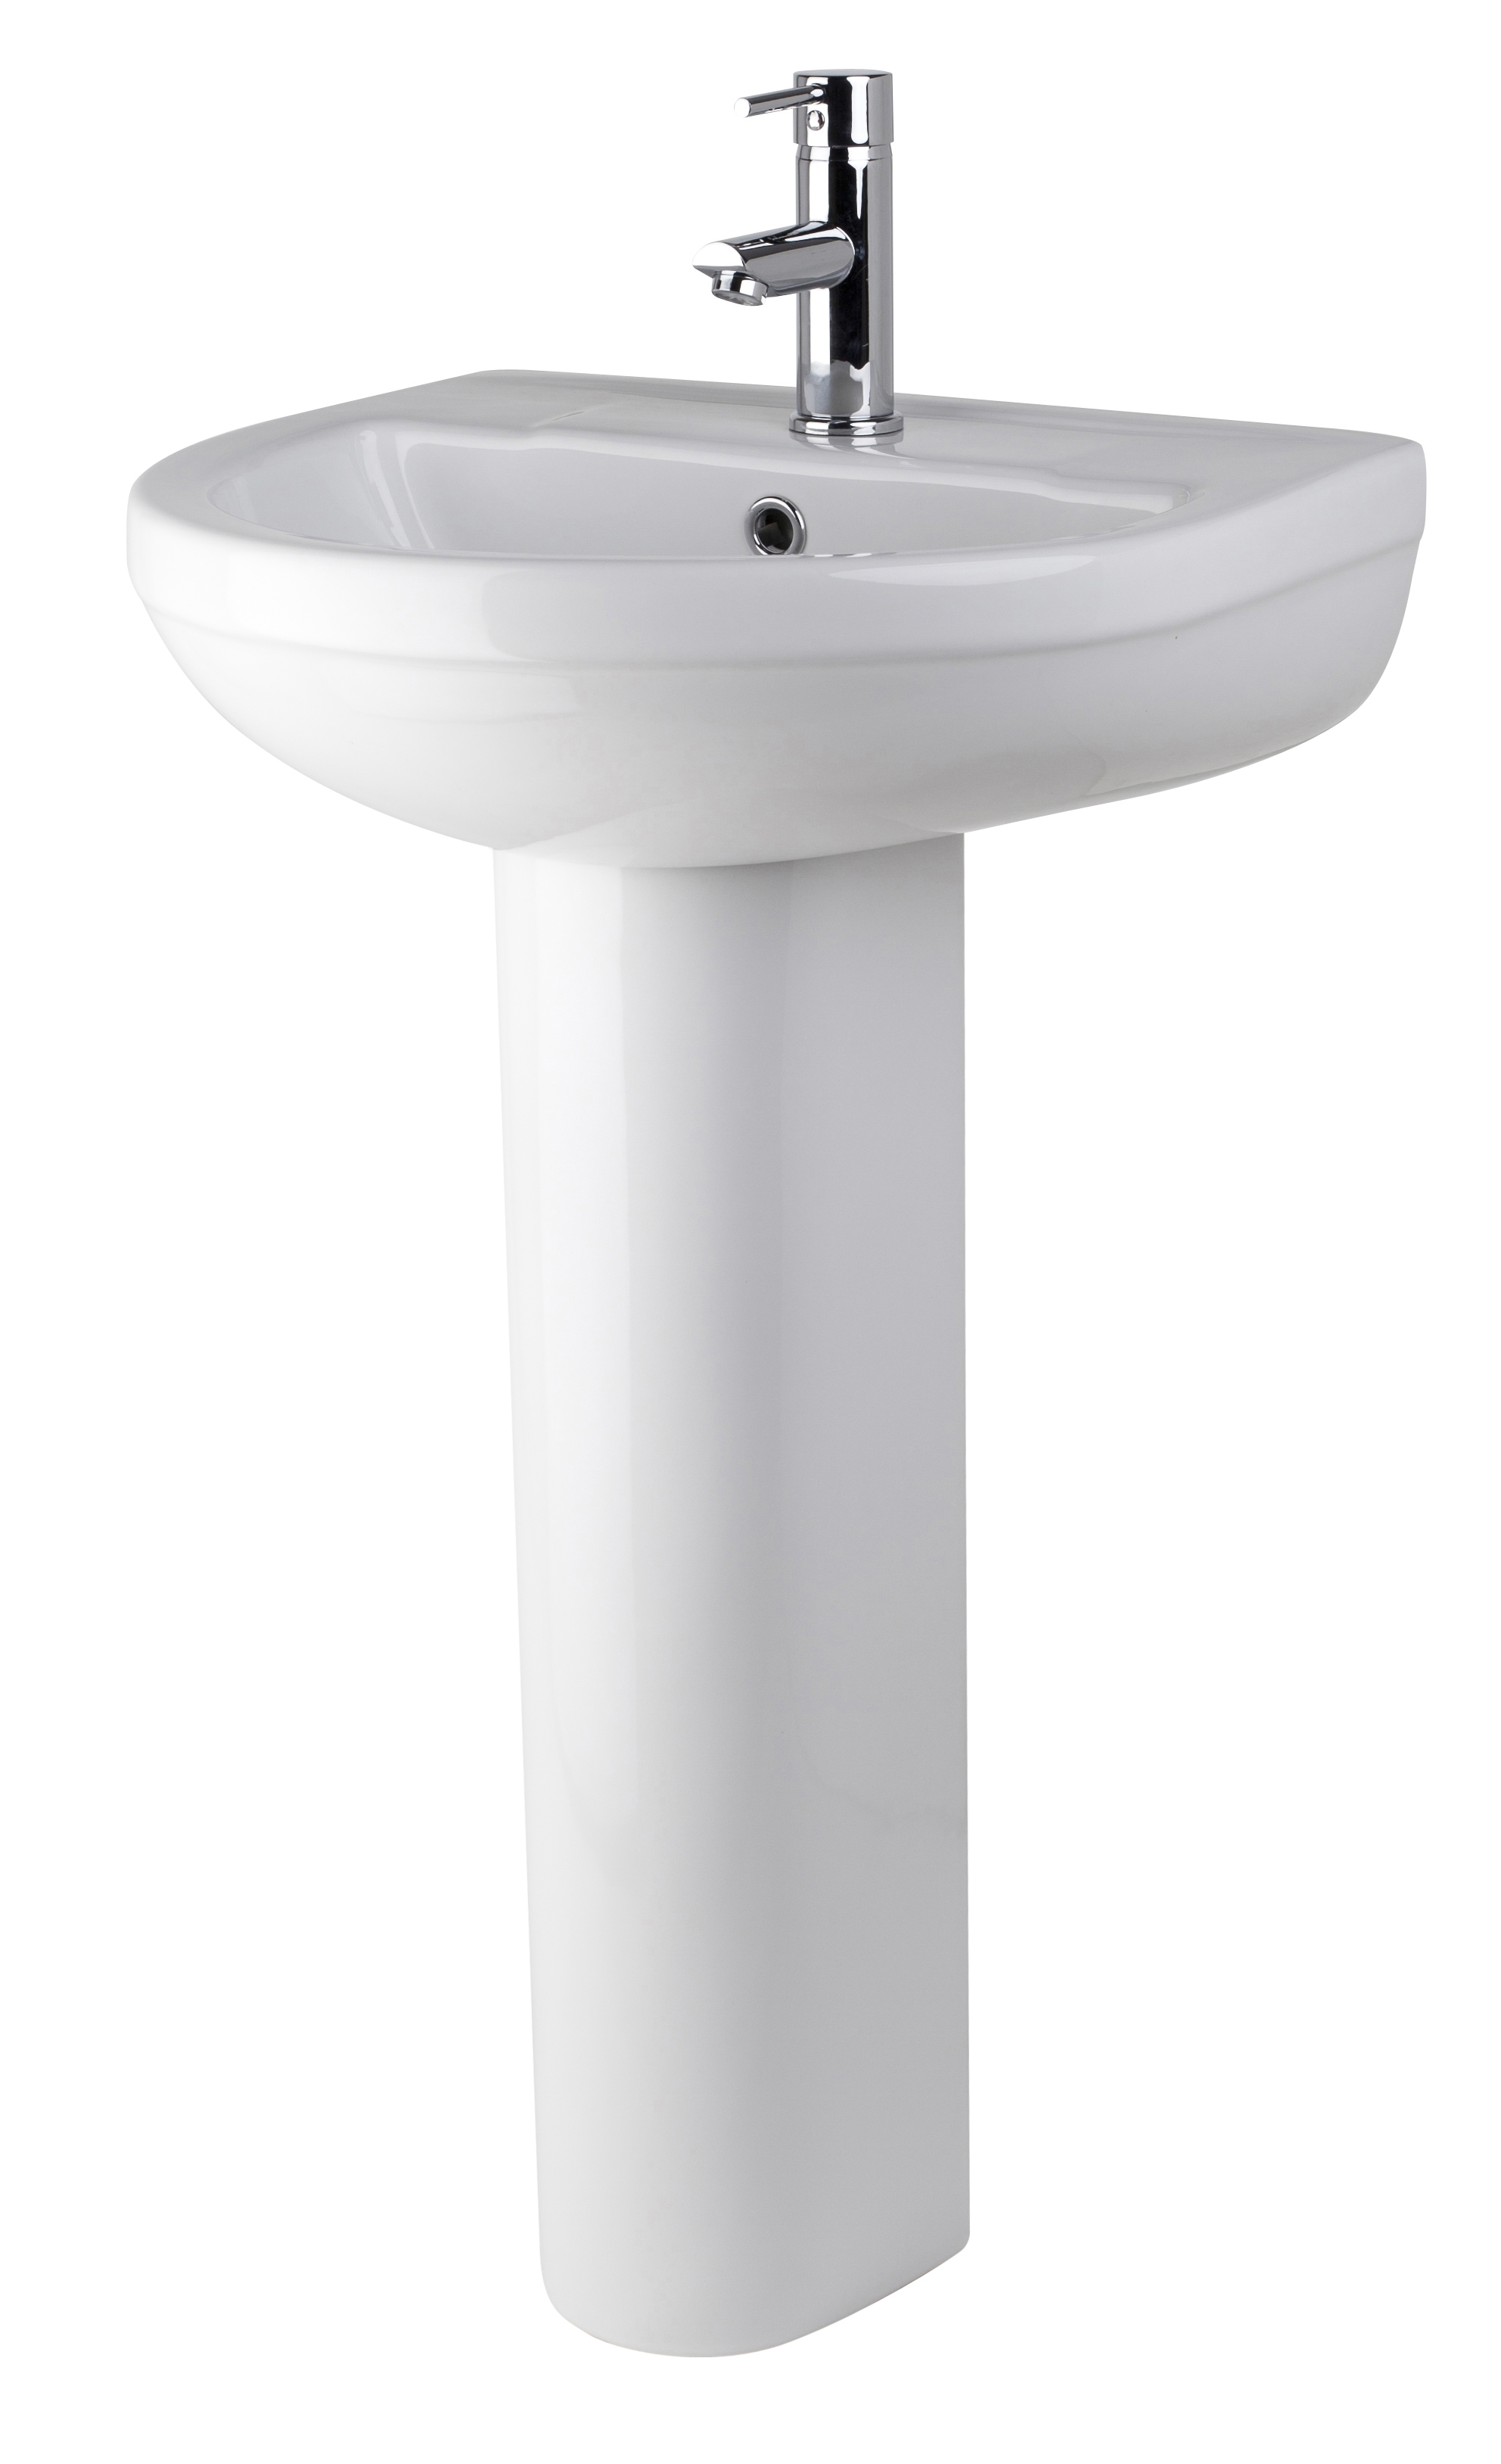 550mm White Nuie CLW003 Modern Bathroom 1 Tap Hole Sink Basin with Full Pedestal